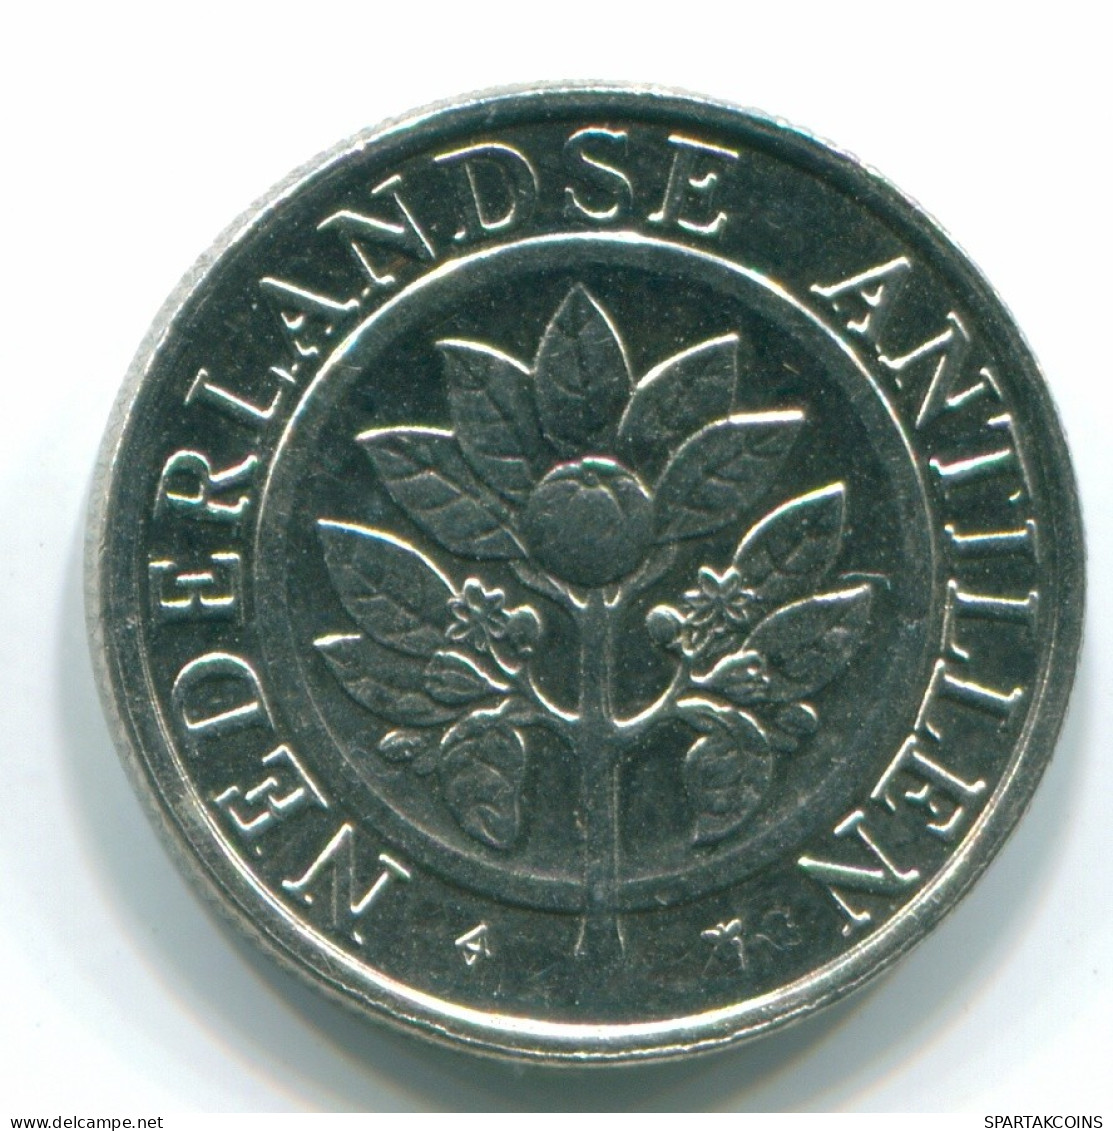 25 CENTS 1990 NETHERLANDS ANTILLES Nickel Colonial Coin #S11272.U.A - Netherlands Antilles